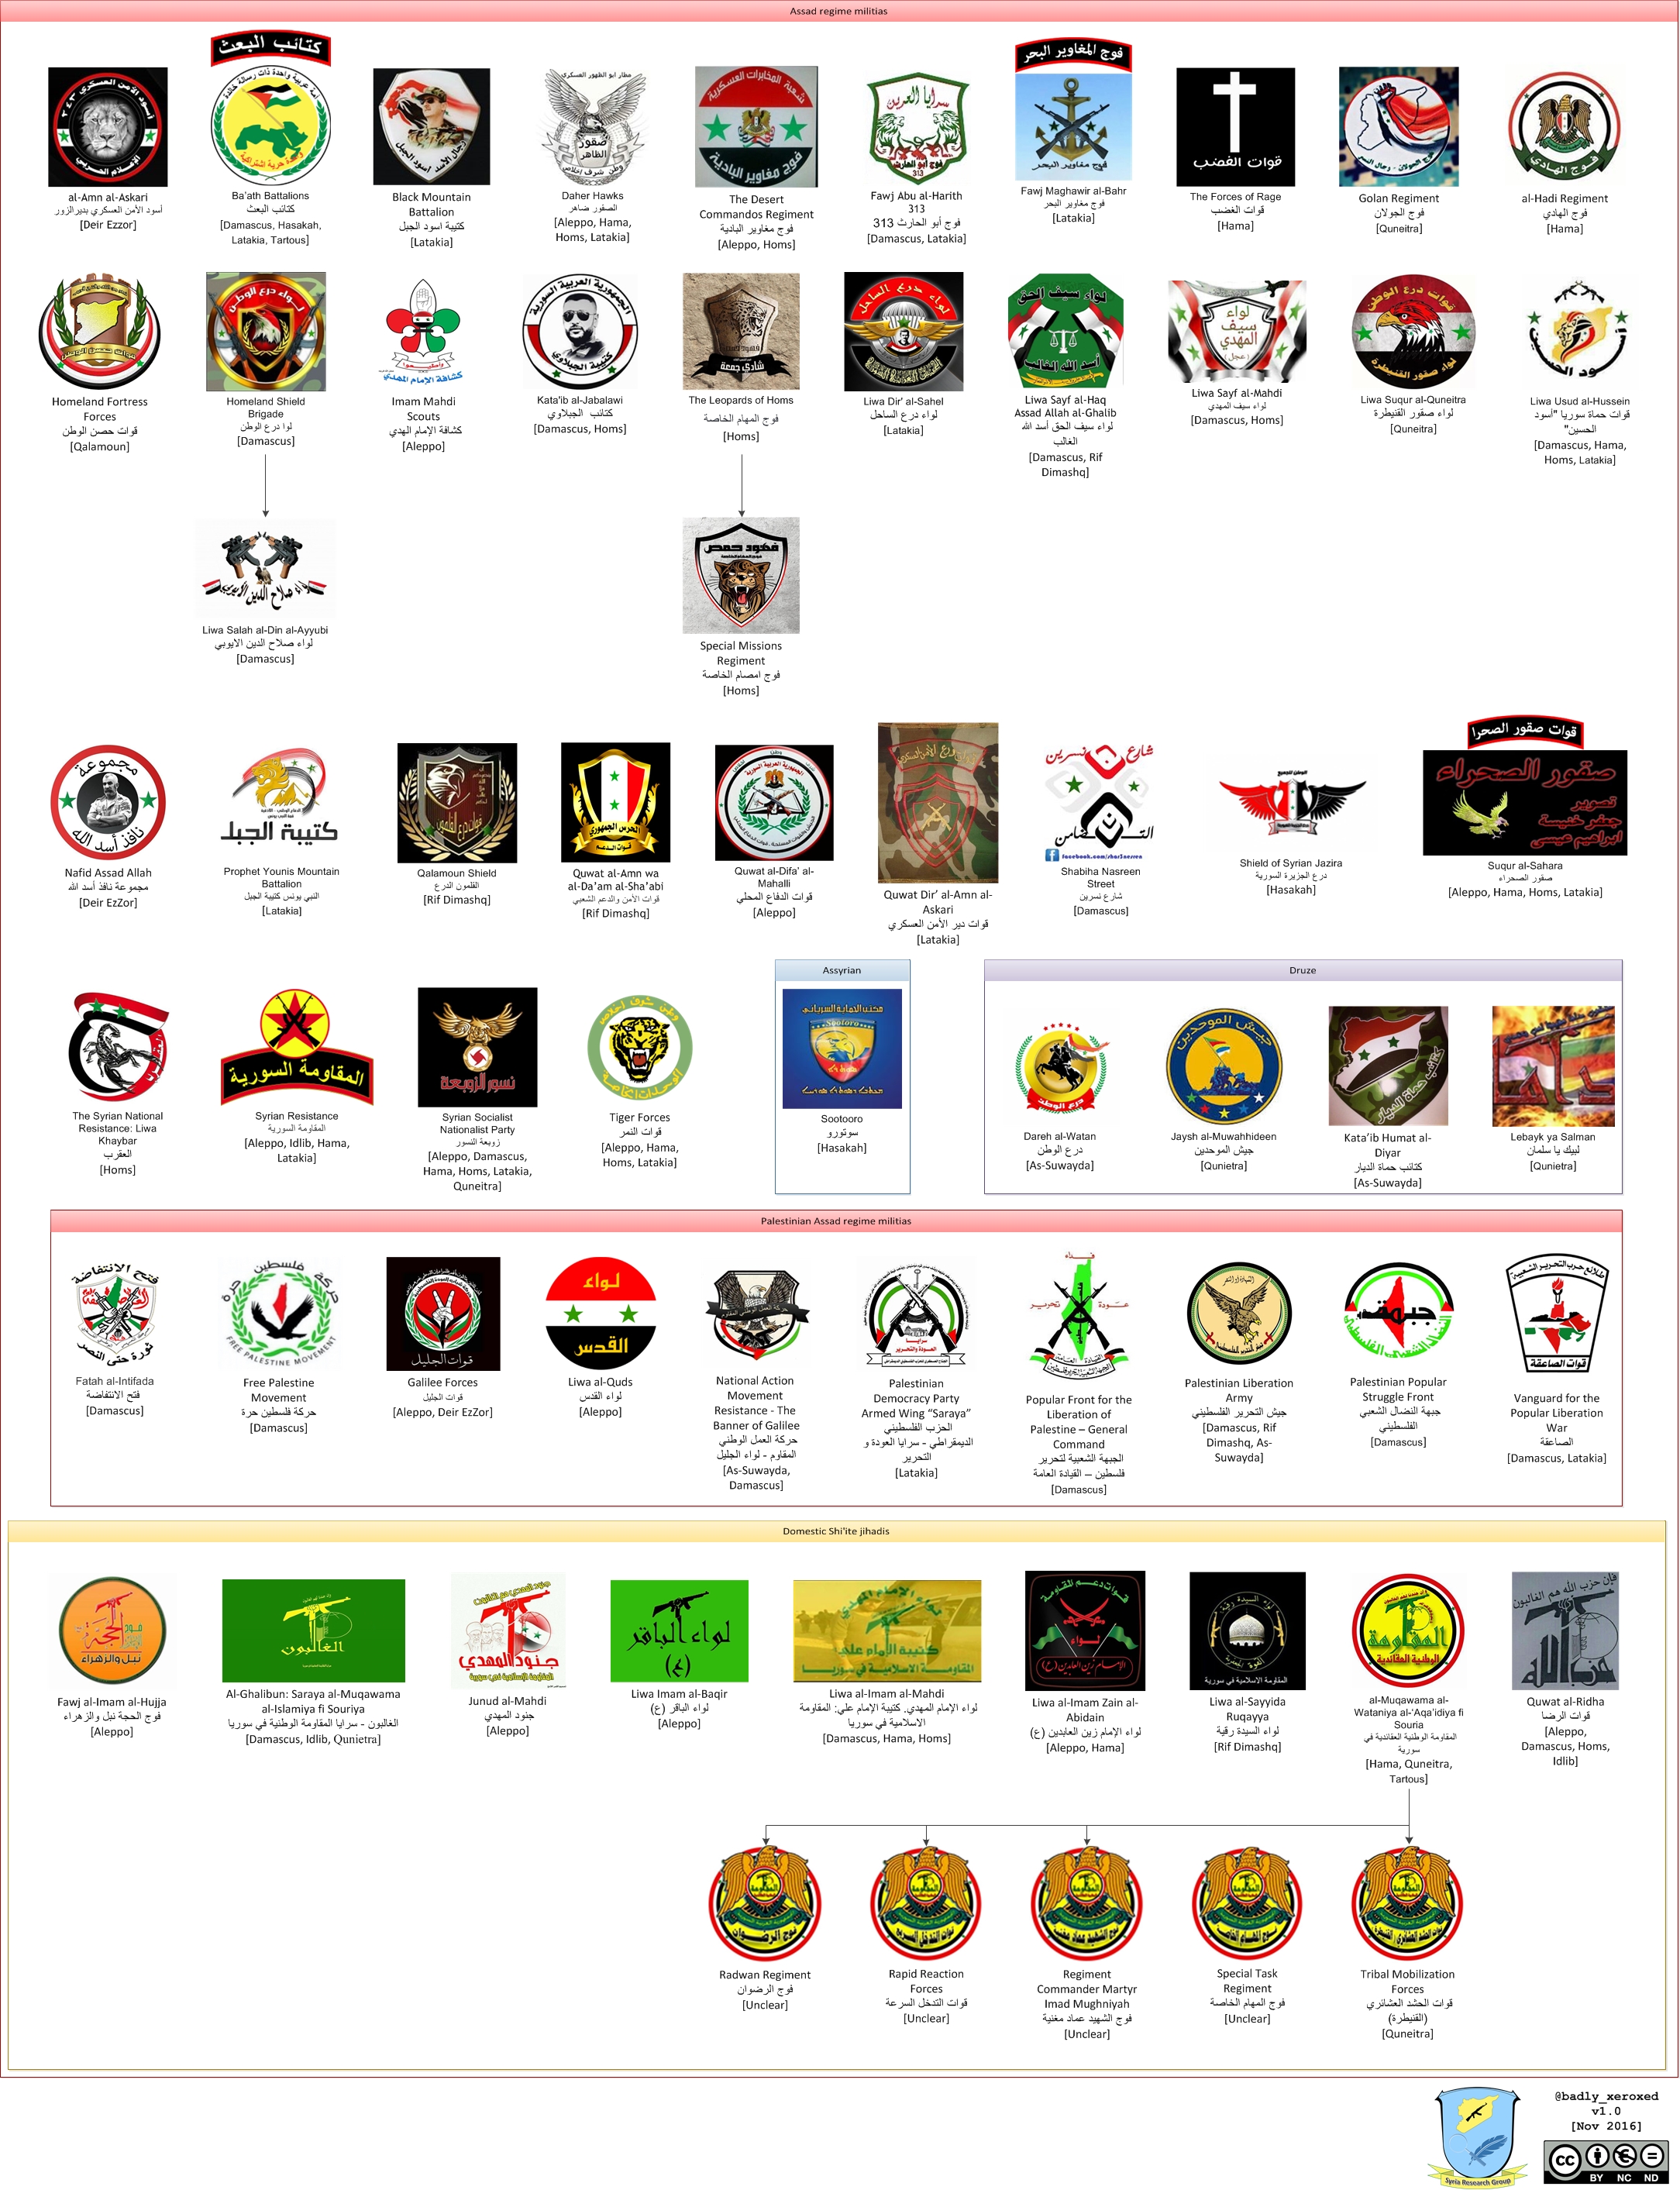 Syria's Armed Forces in the 7th Year of War